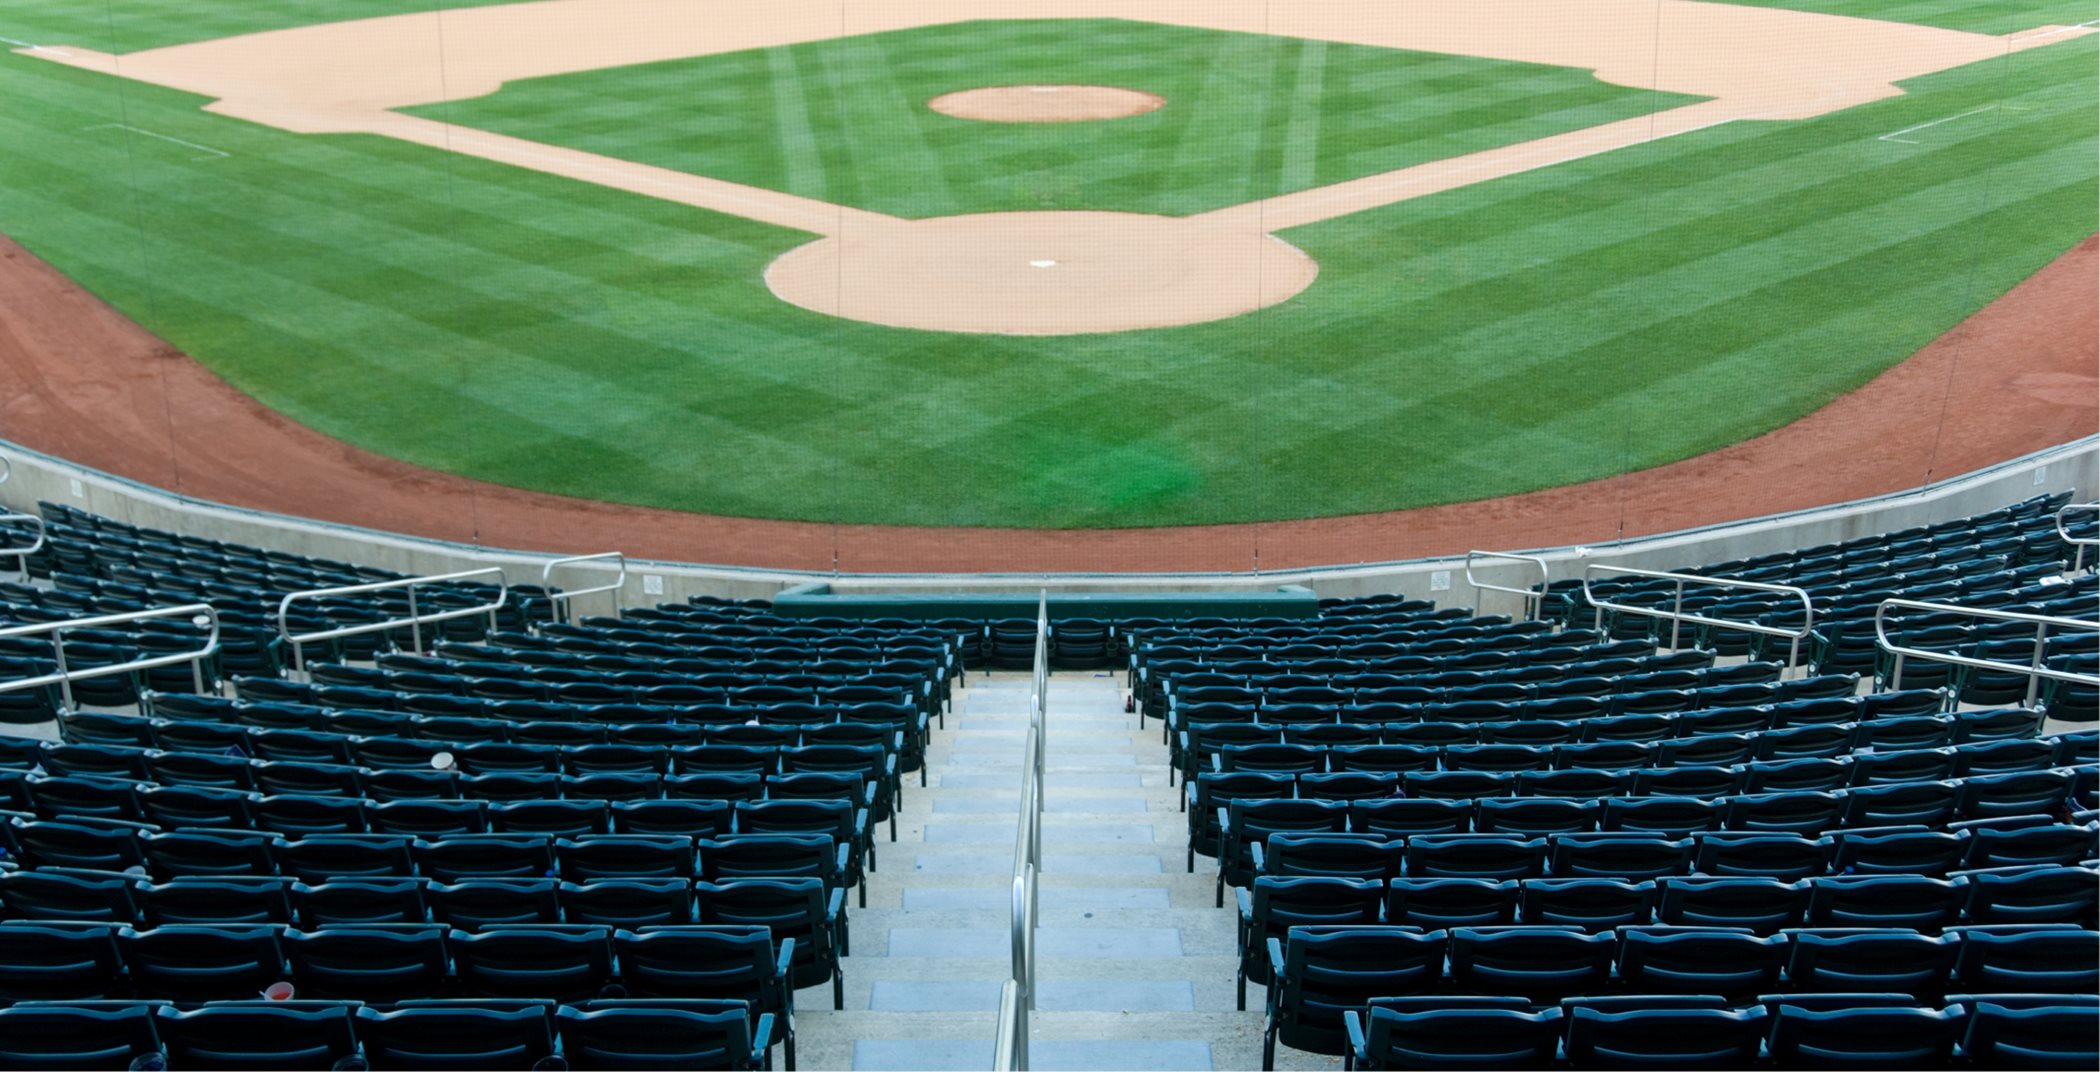 Baseball mound view from stands